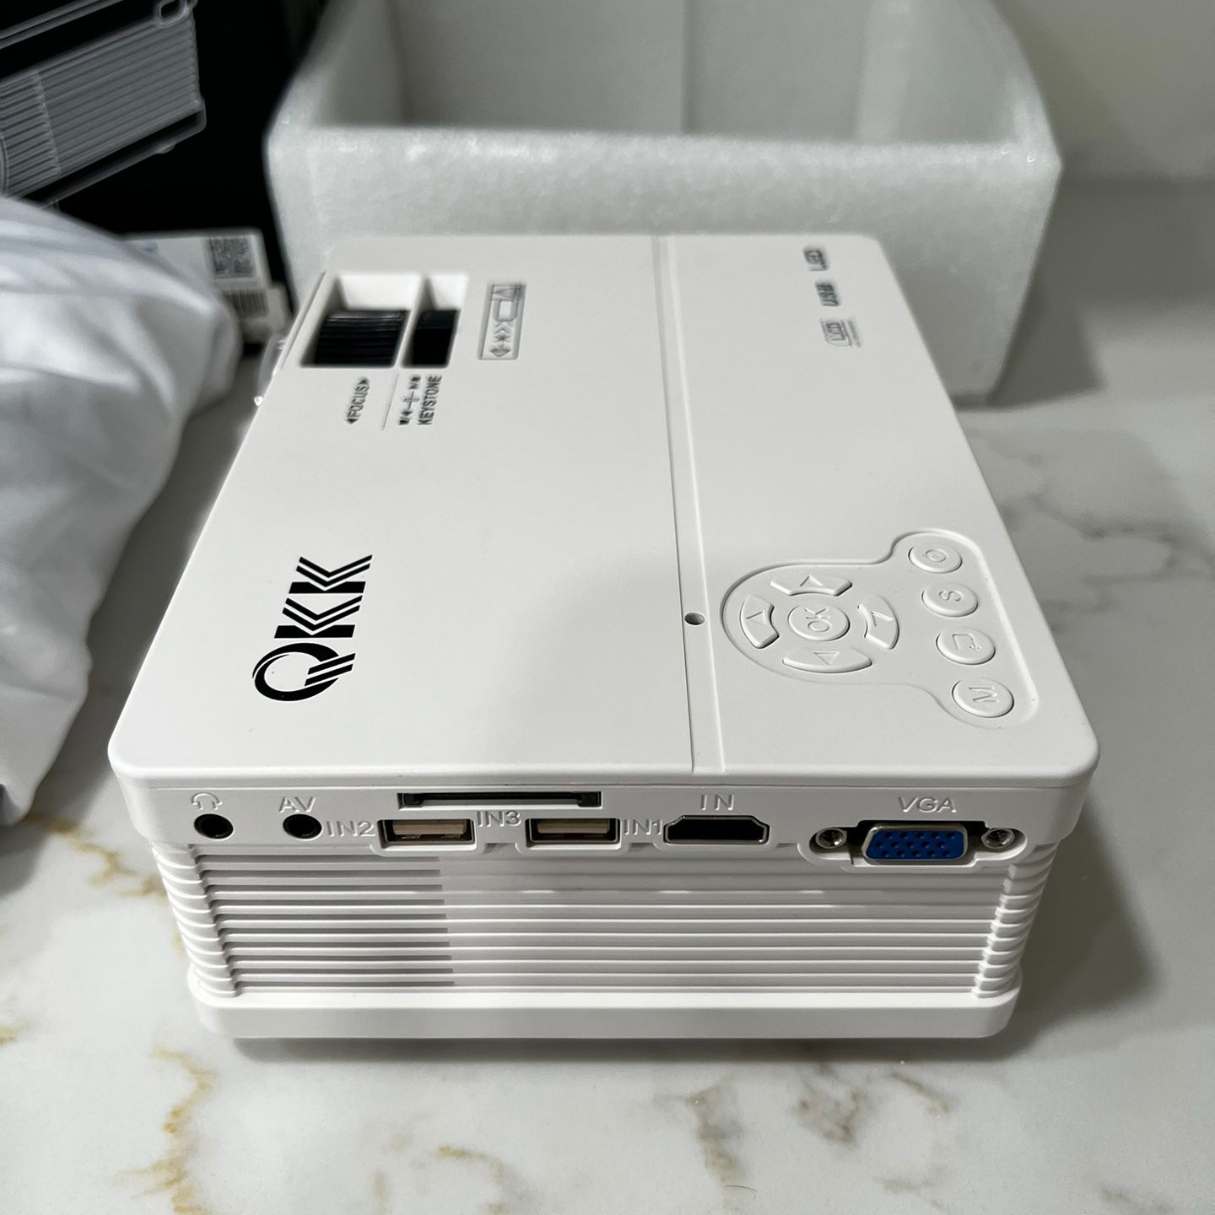 How To Connect QKK Mini Projector To IPhone